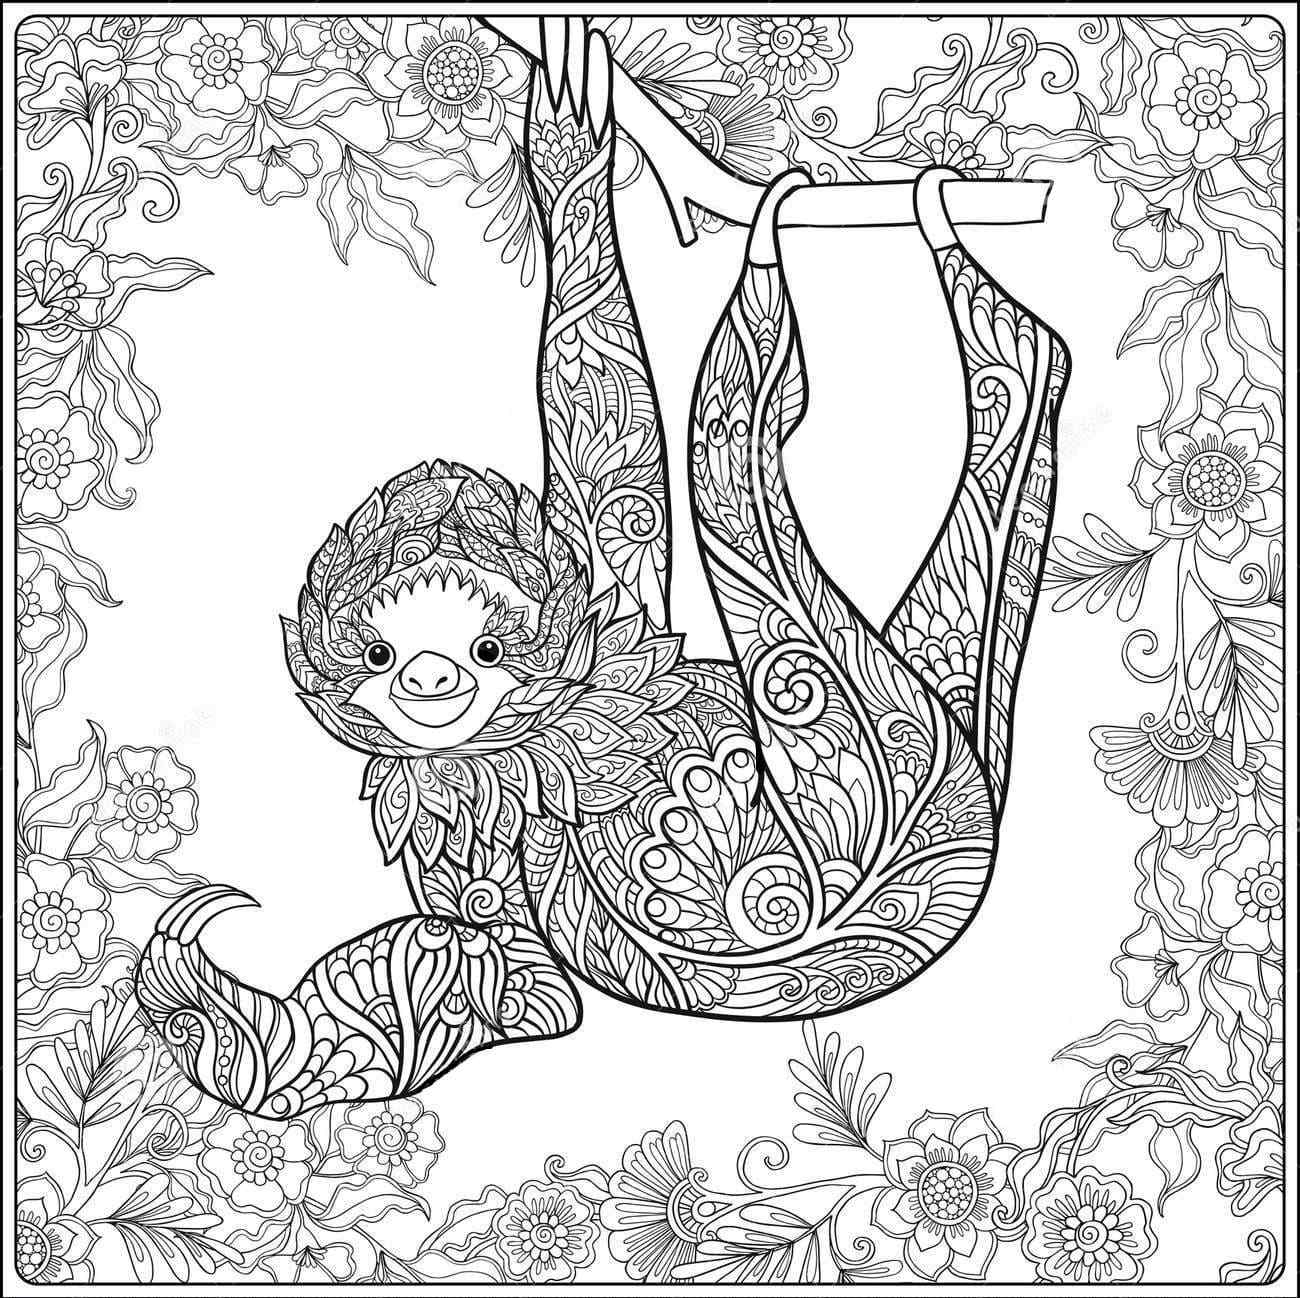 Decorate The Sloth Coloring Page